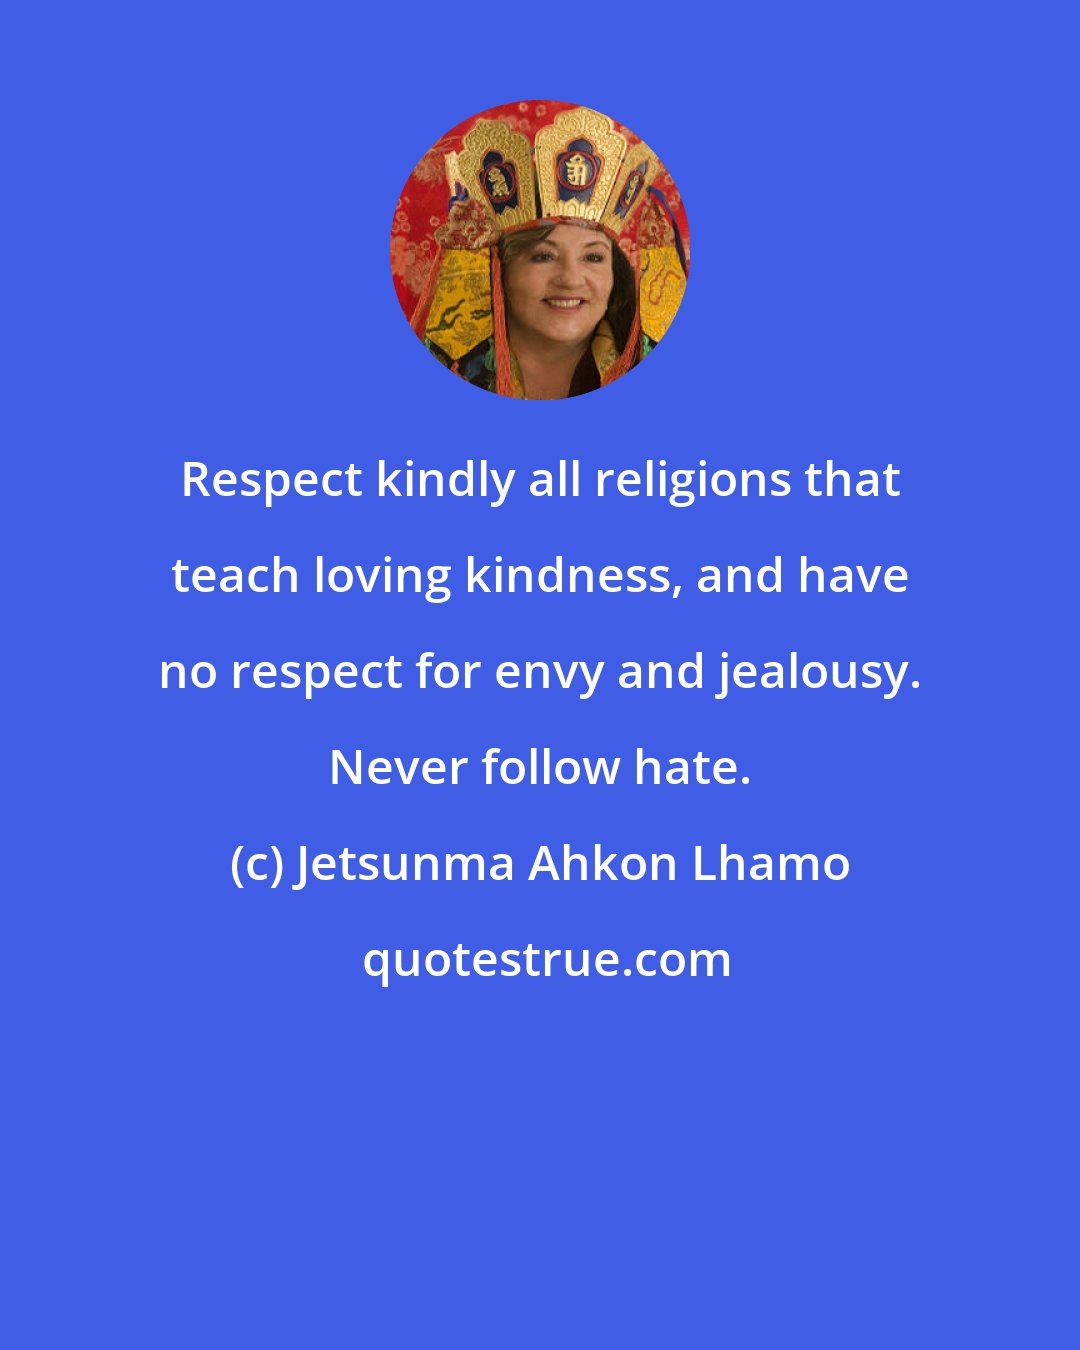 Jetsunma Ahkon Lhamo: Respect kindly all religions that teach loving kindness, and have no respect for envy and jealousy. Never follow hate.